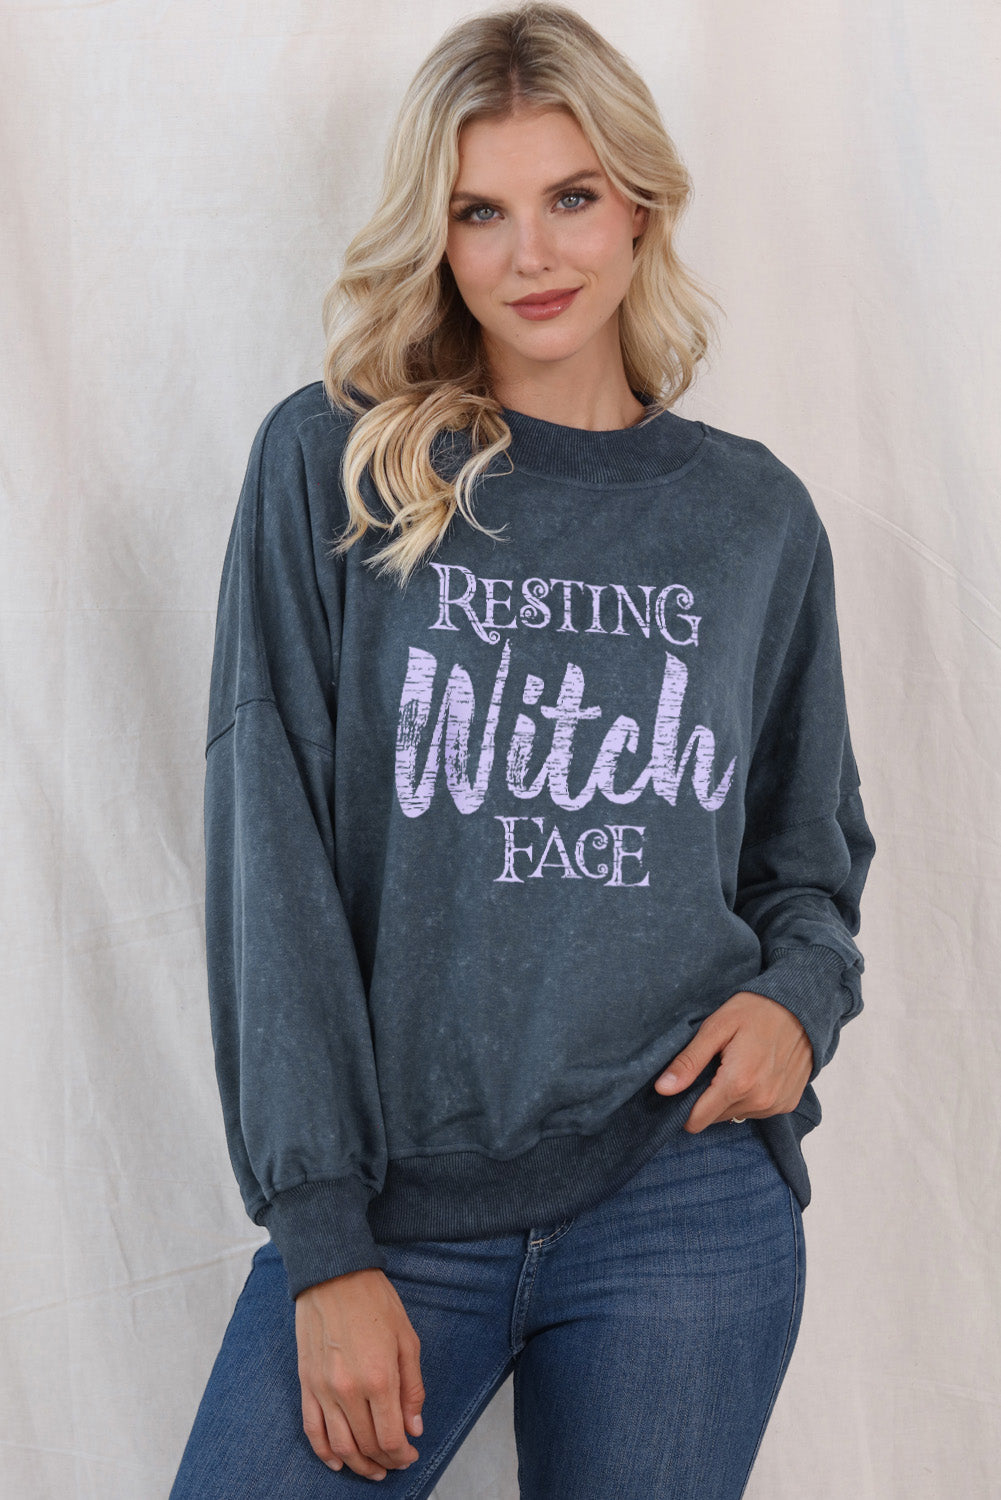 Round Neck RESTING WITCH FACE Graphic Sweatshirt - Blue / S - T-Shirts - Shirts & Tops - 1 - 2024